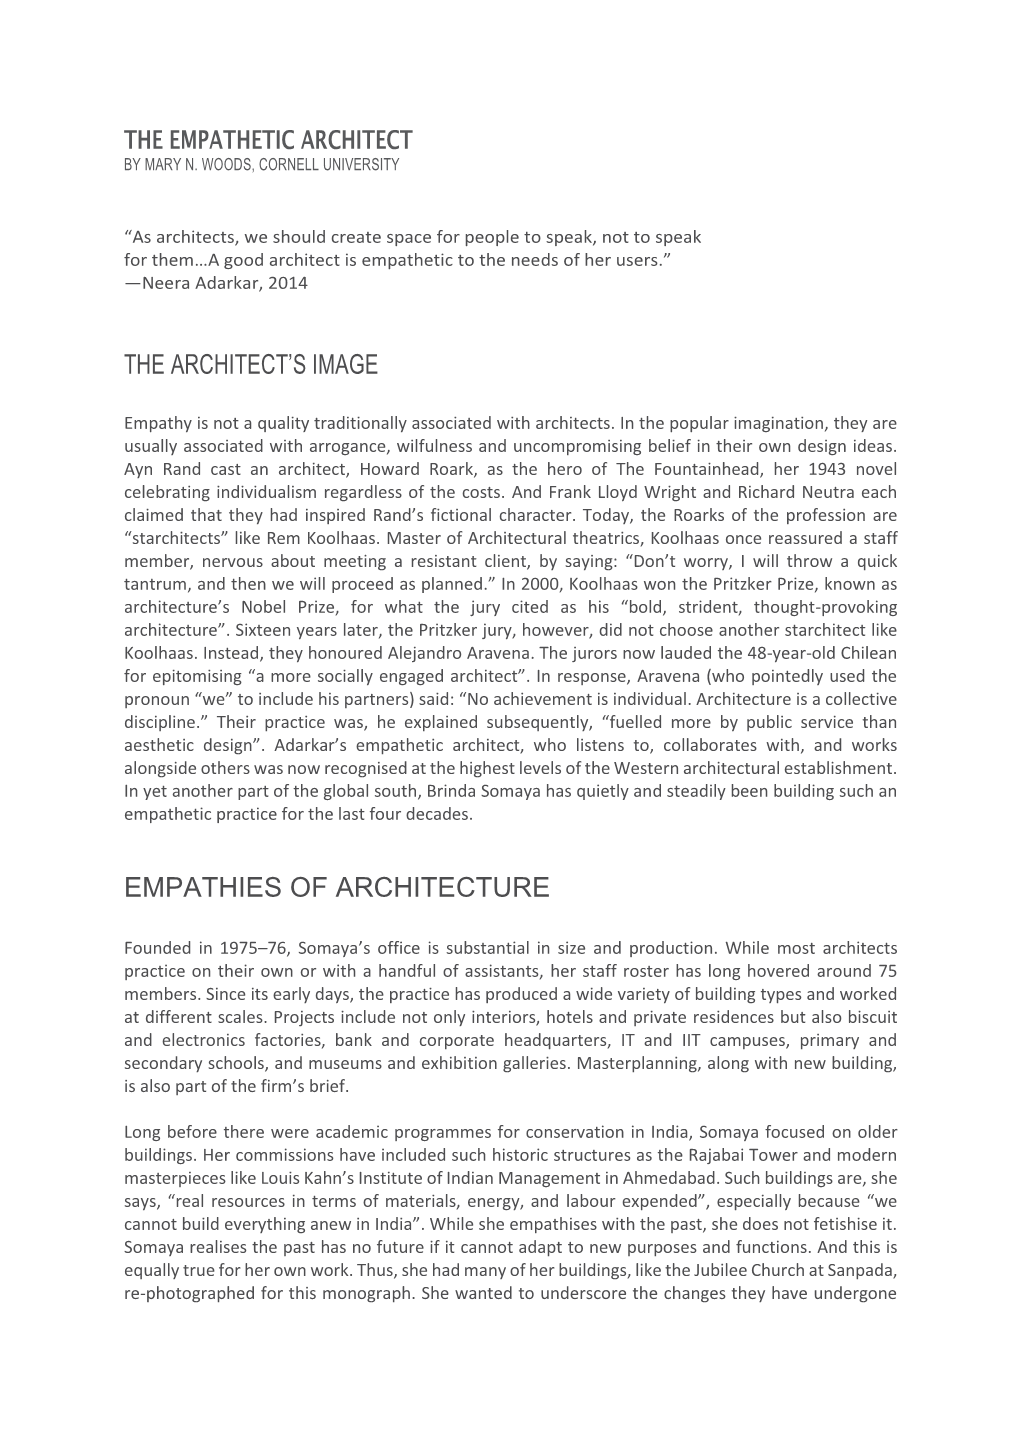 The Empathetic Architect by Mary N